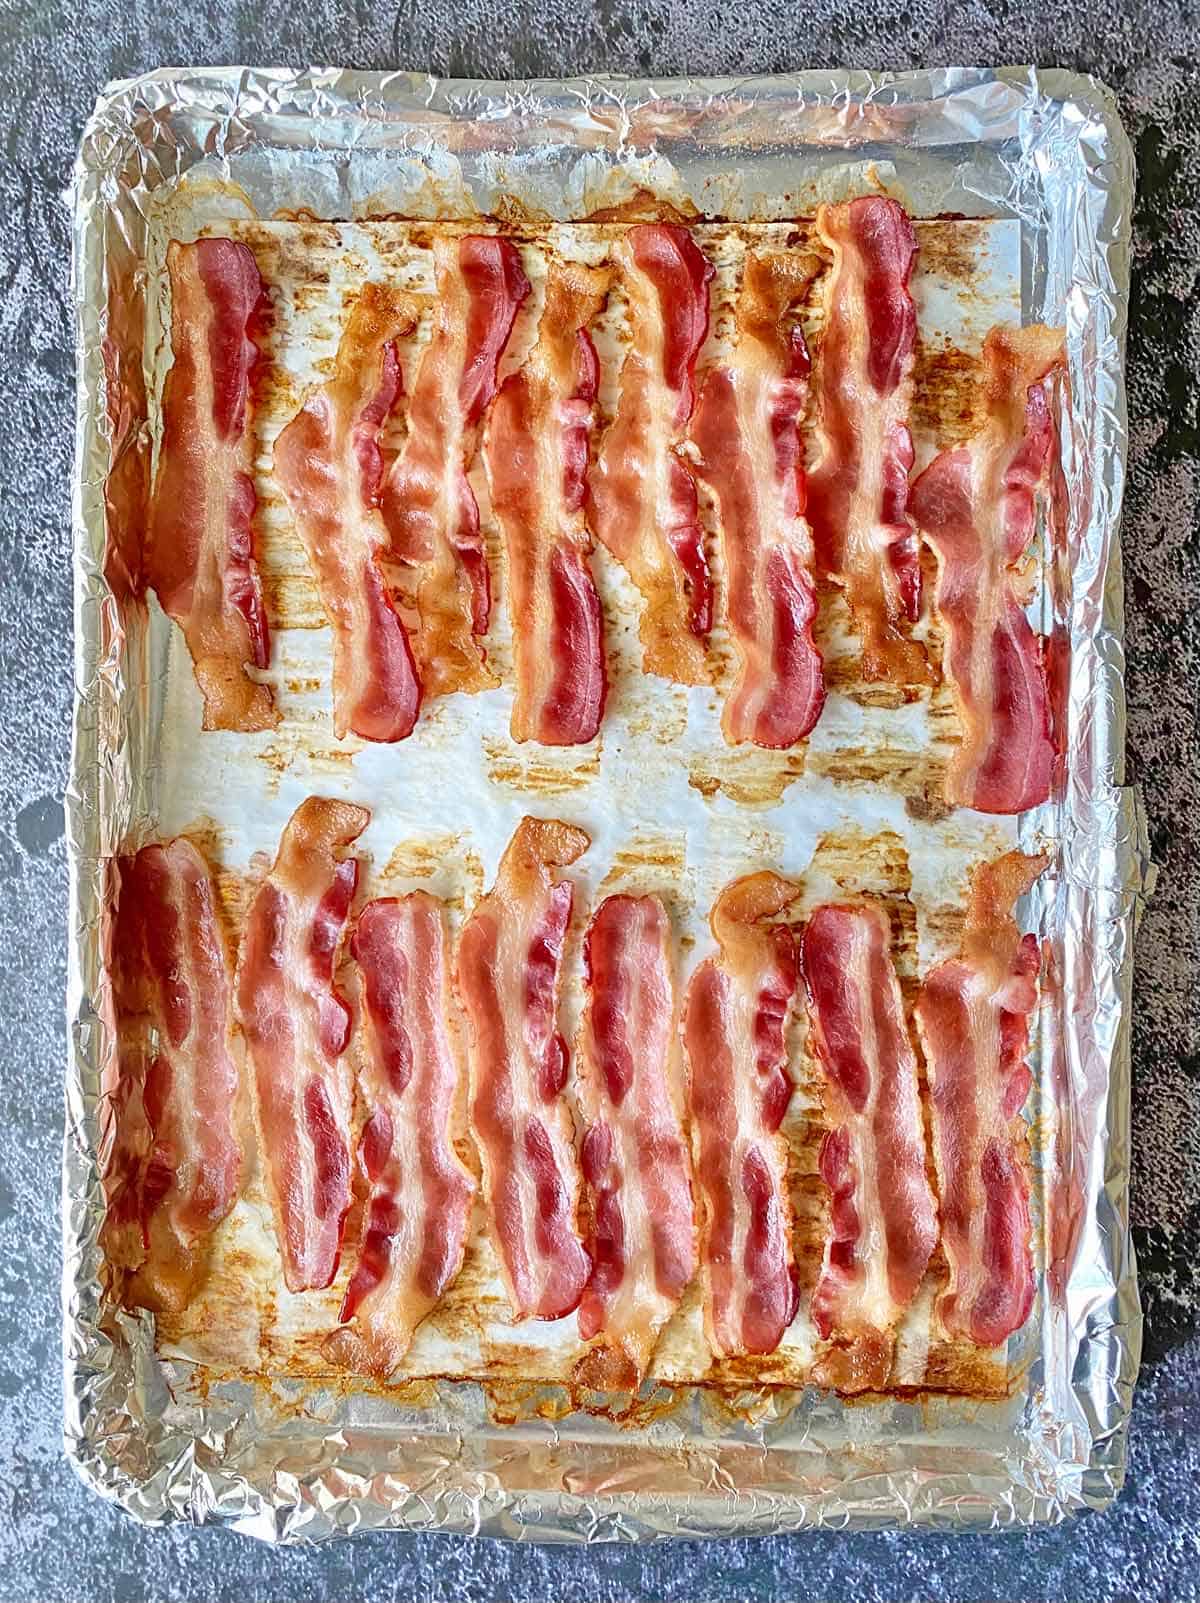 Partially cooked bacon strips on a baking pan.